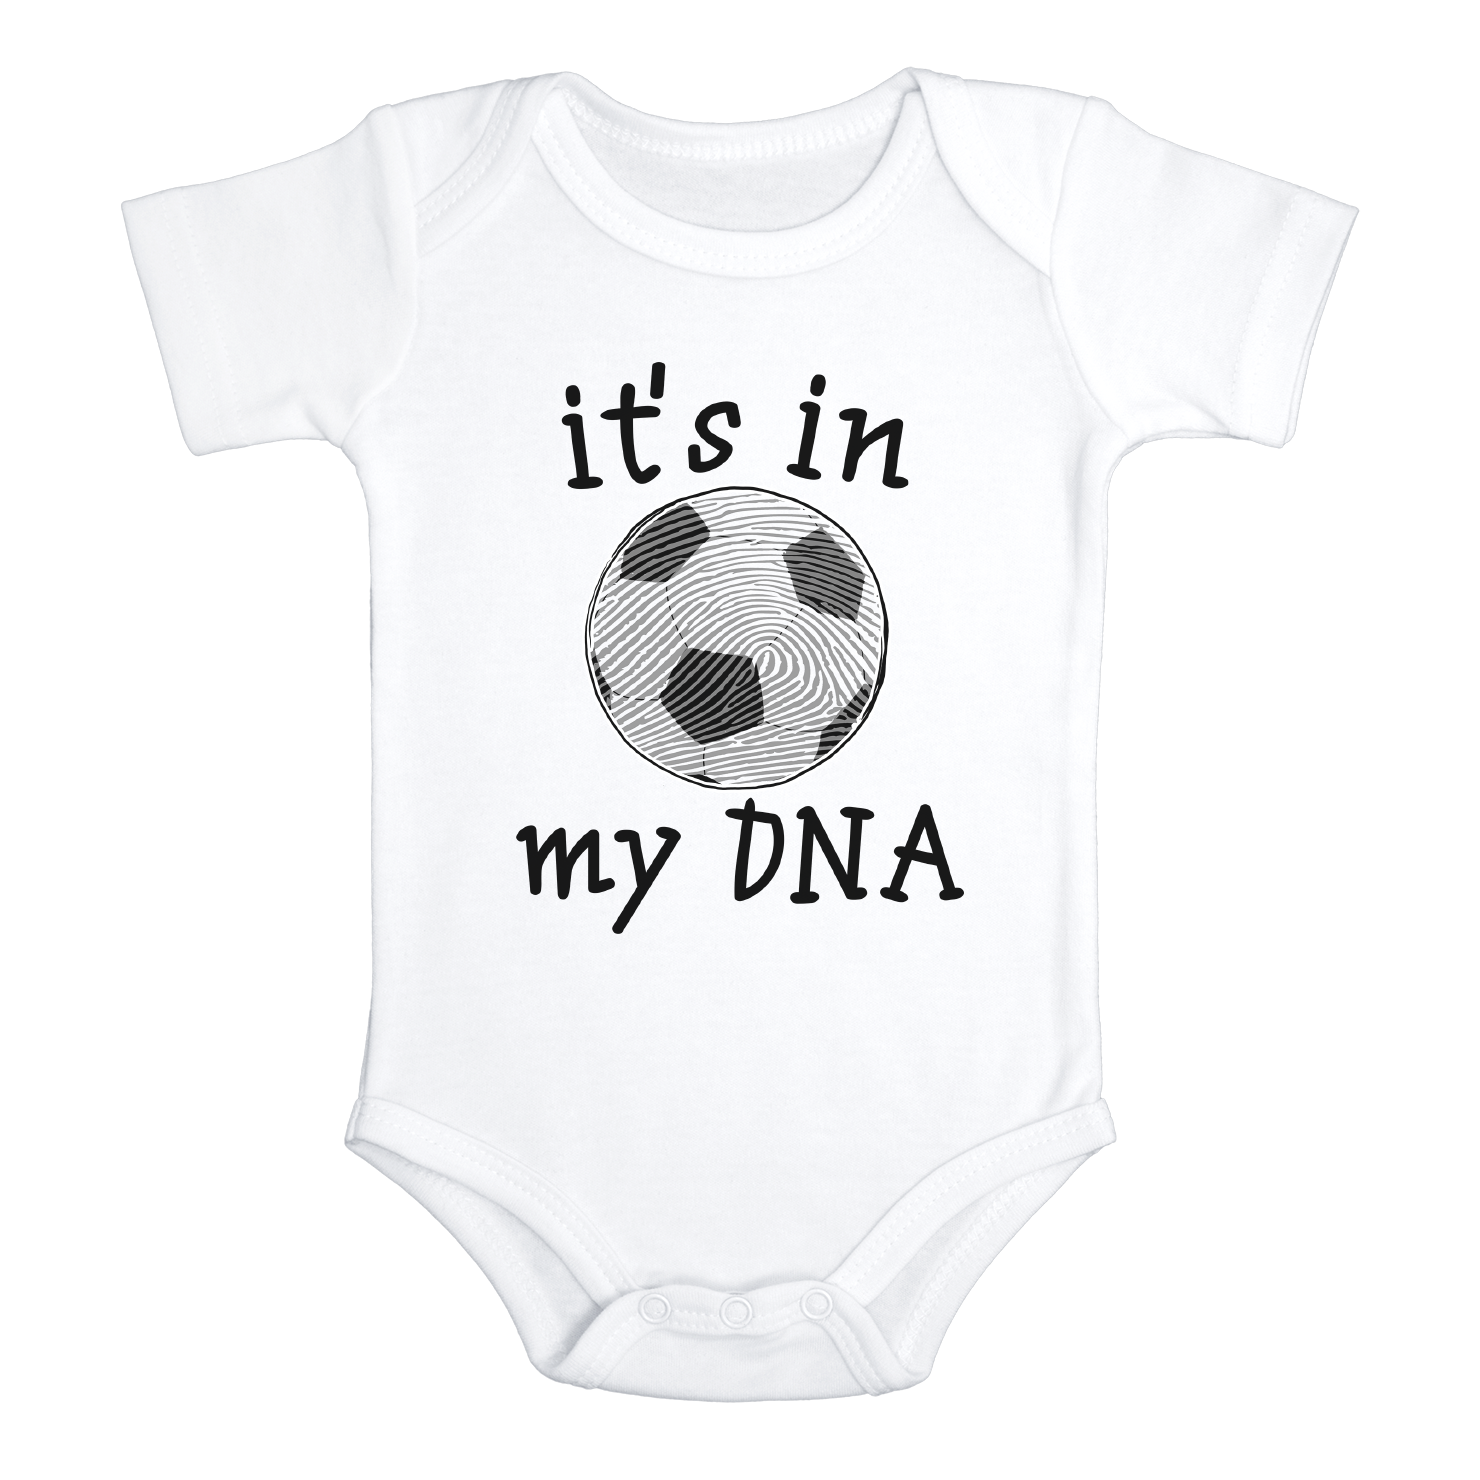 IT'S IN MY DNA SOCCER Funny baby Sports onesies math bodysuit (white: short or long sleeve)